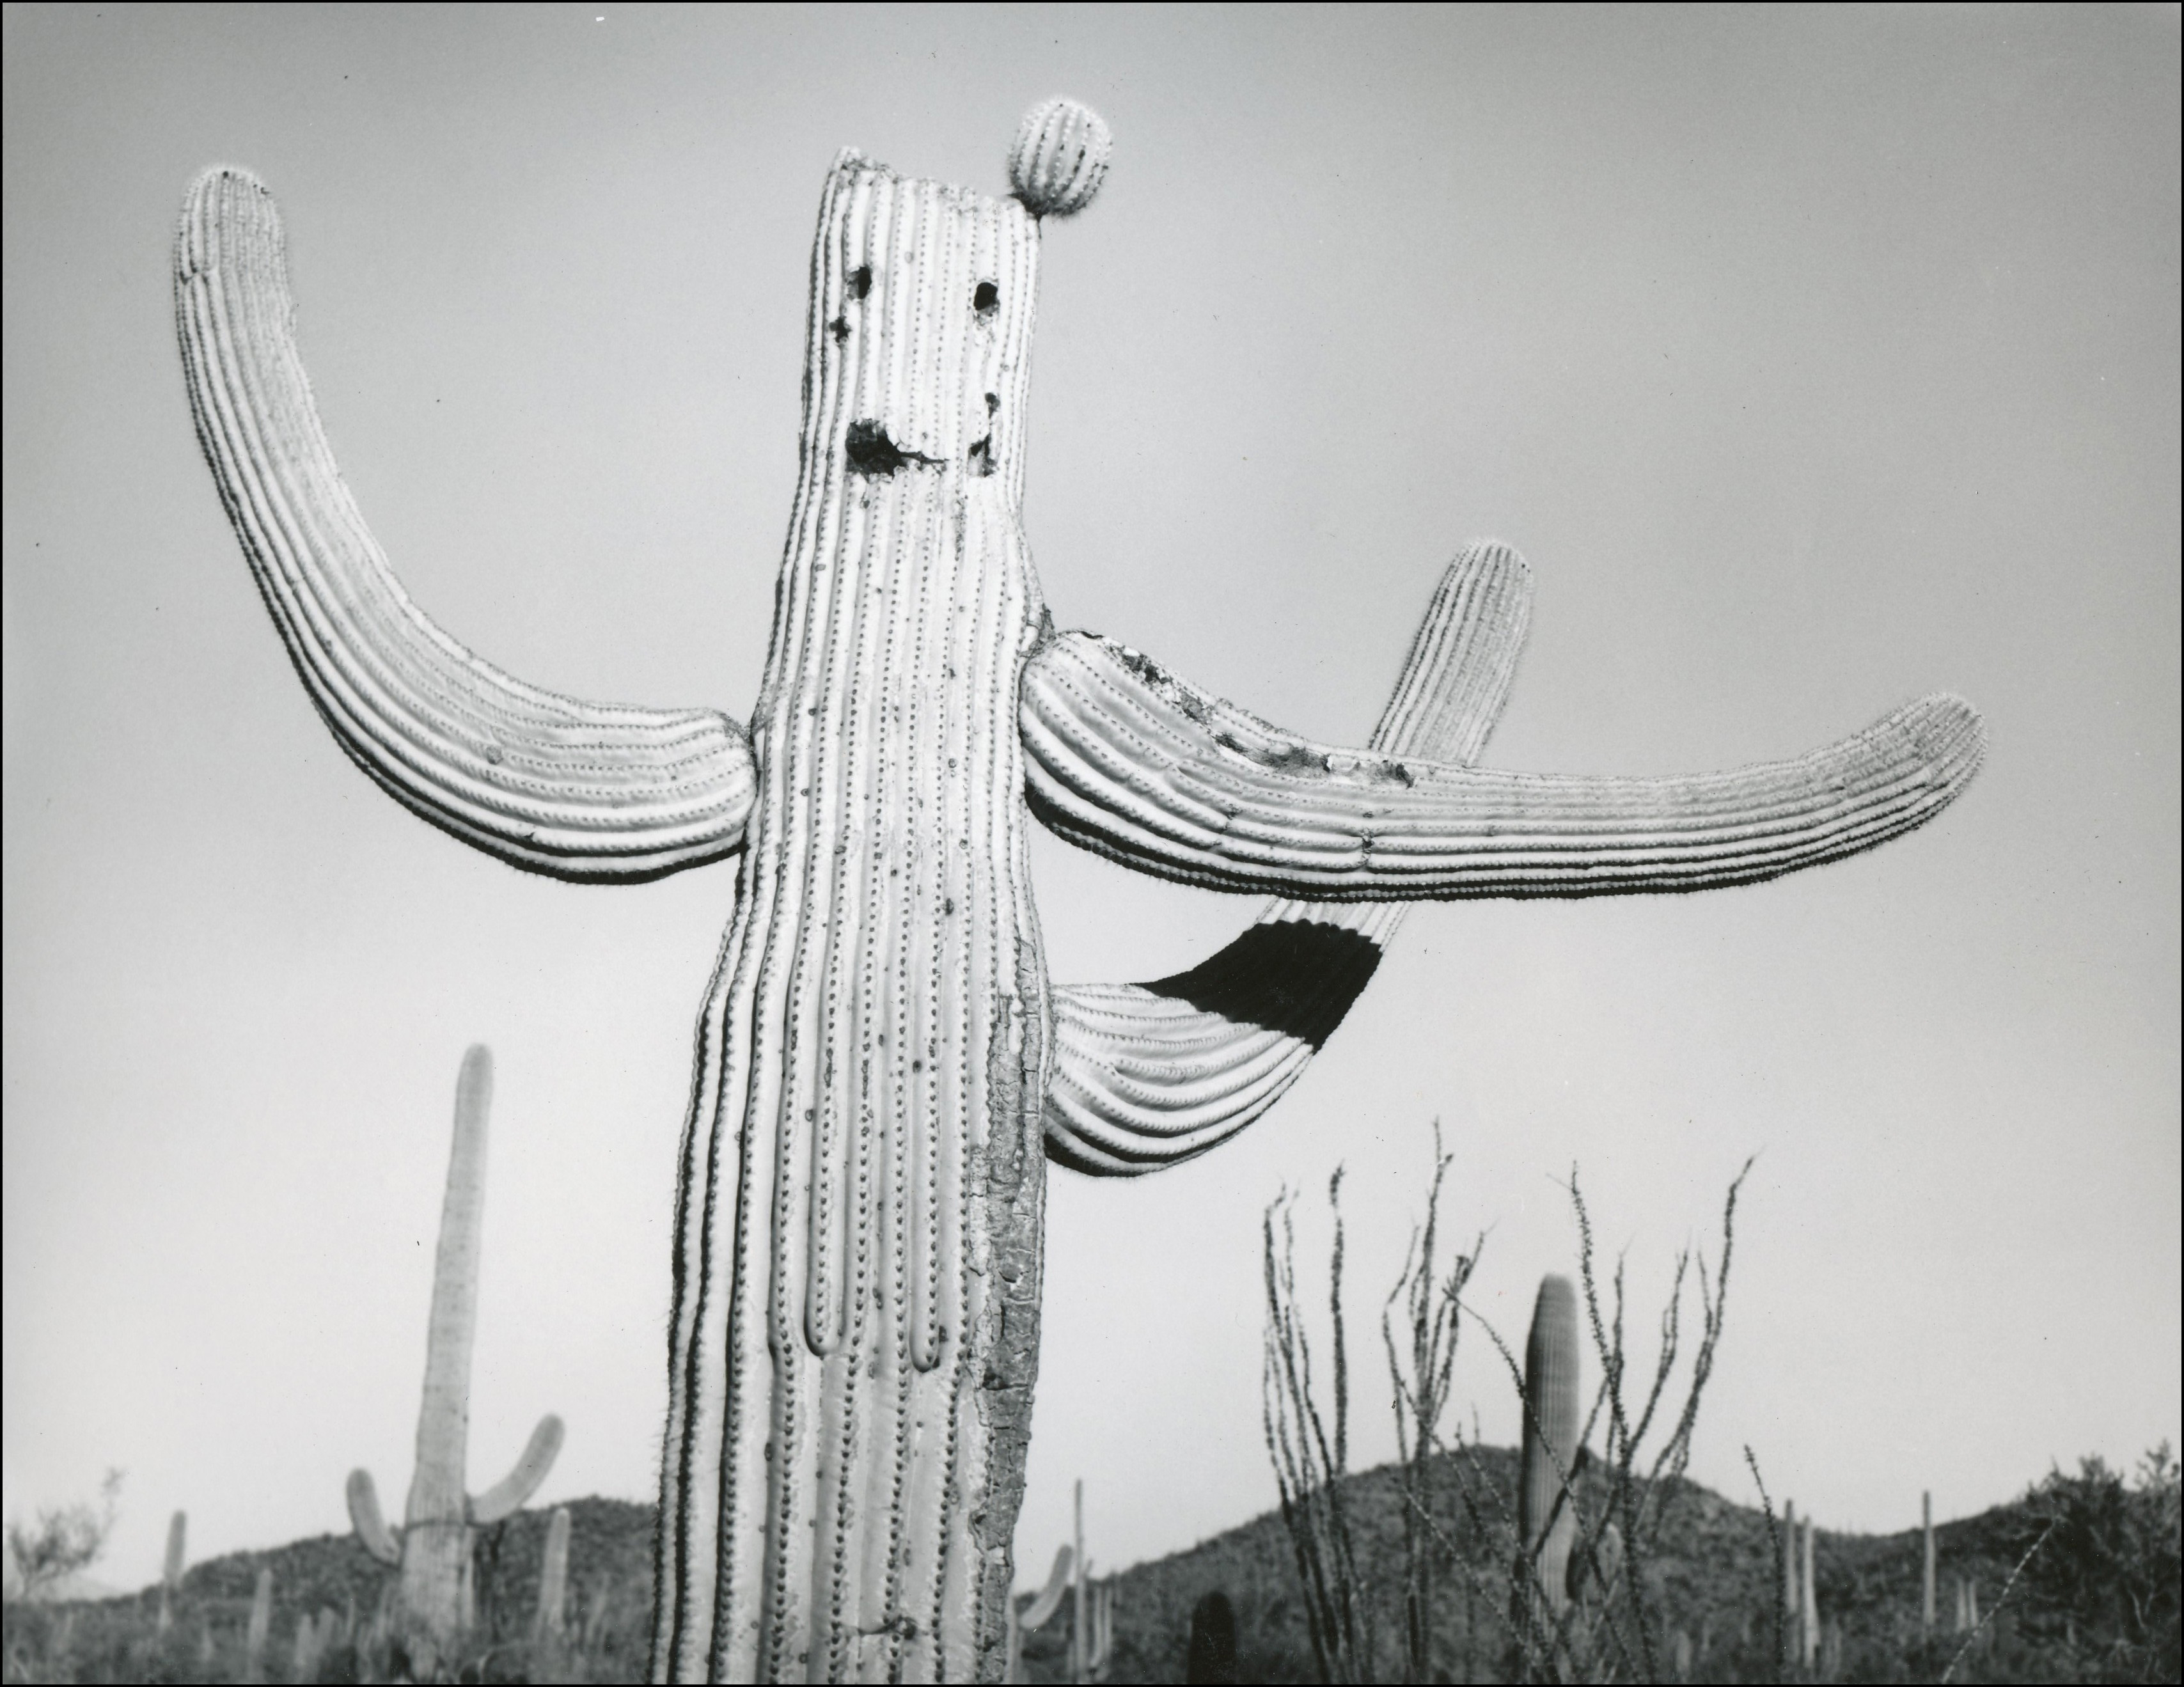 Saguaro cactus with three arms and holes from wood peckers that make a smiley face